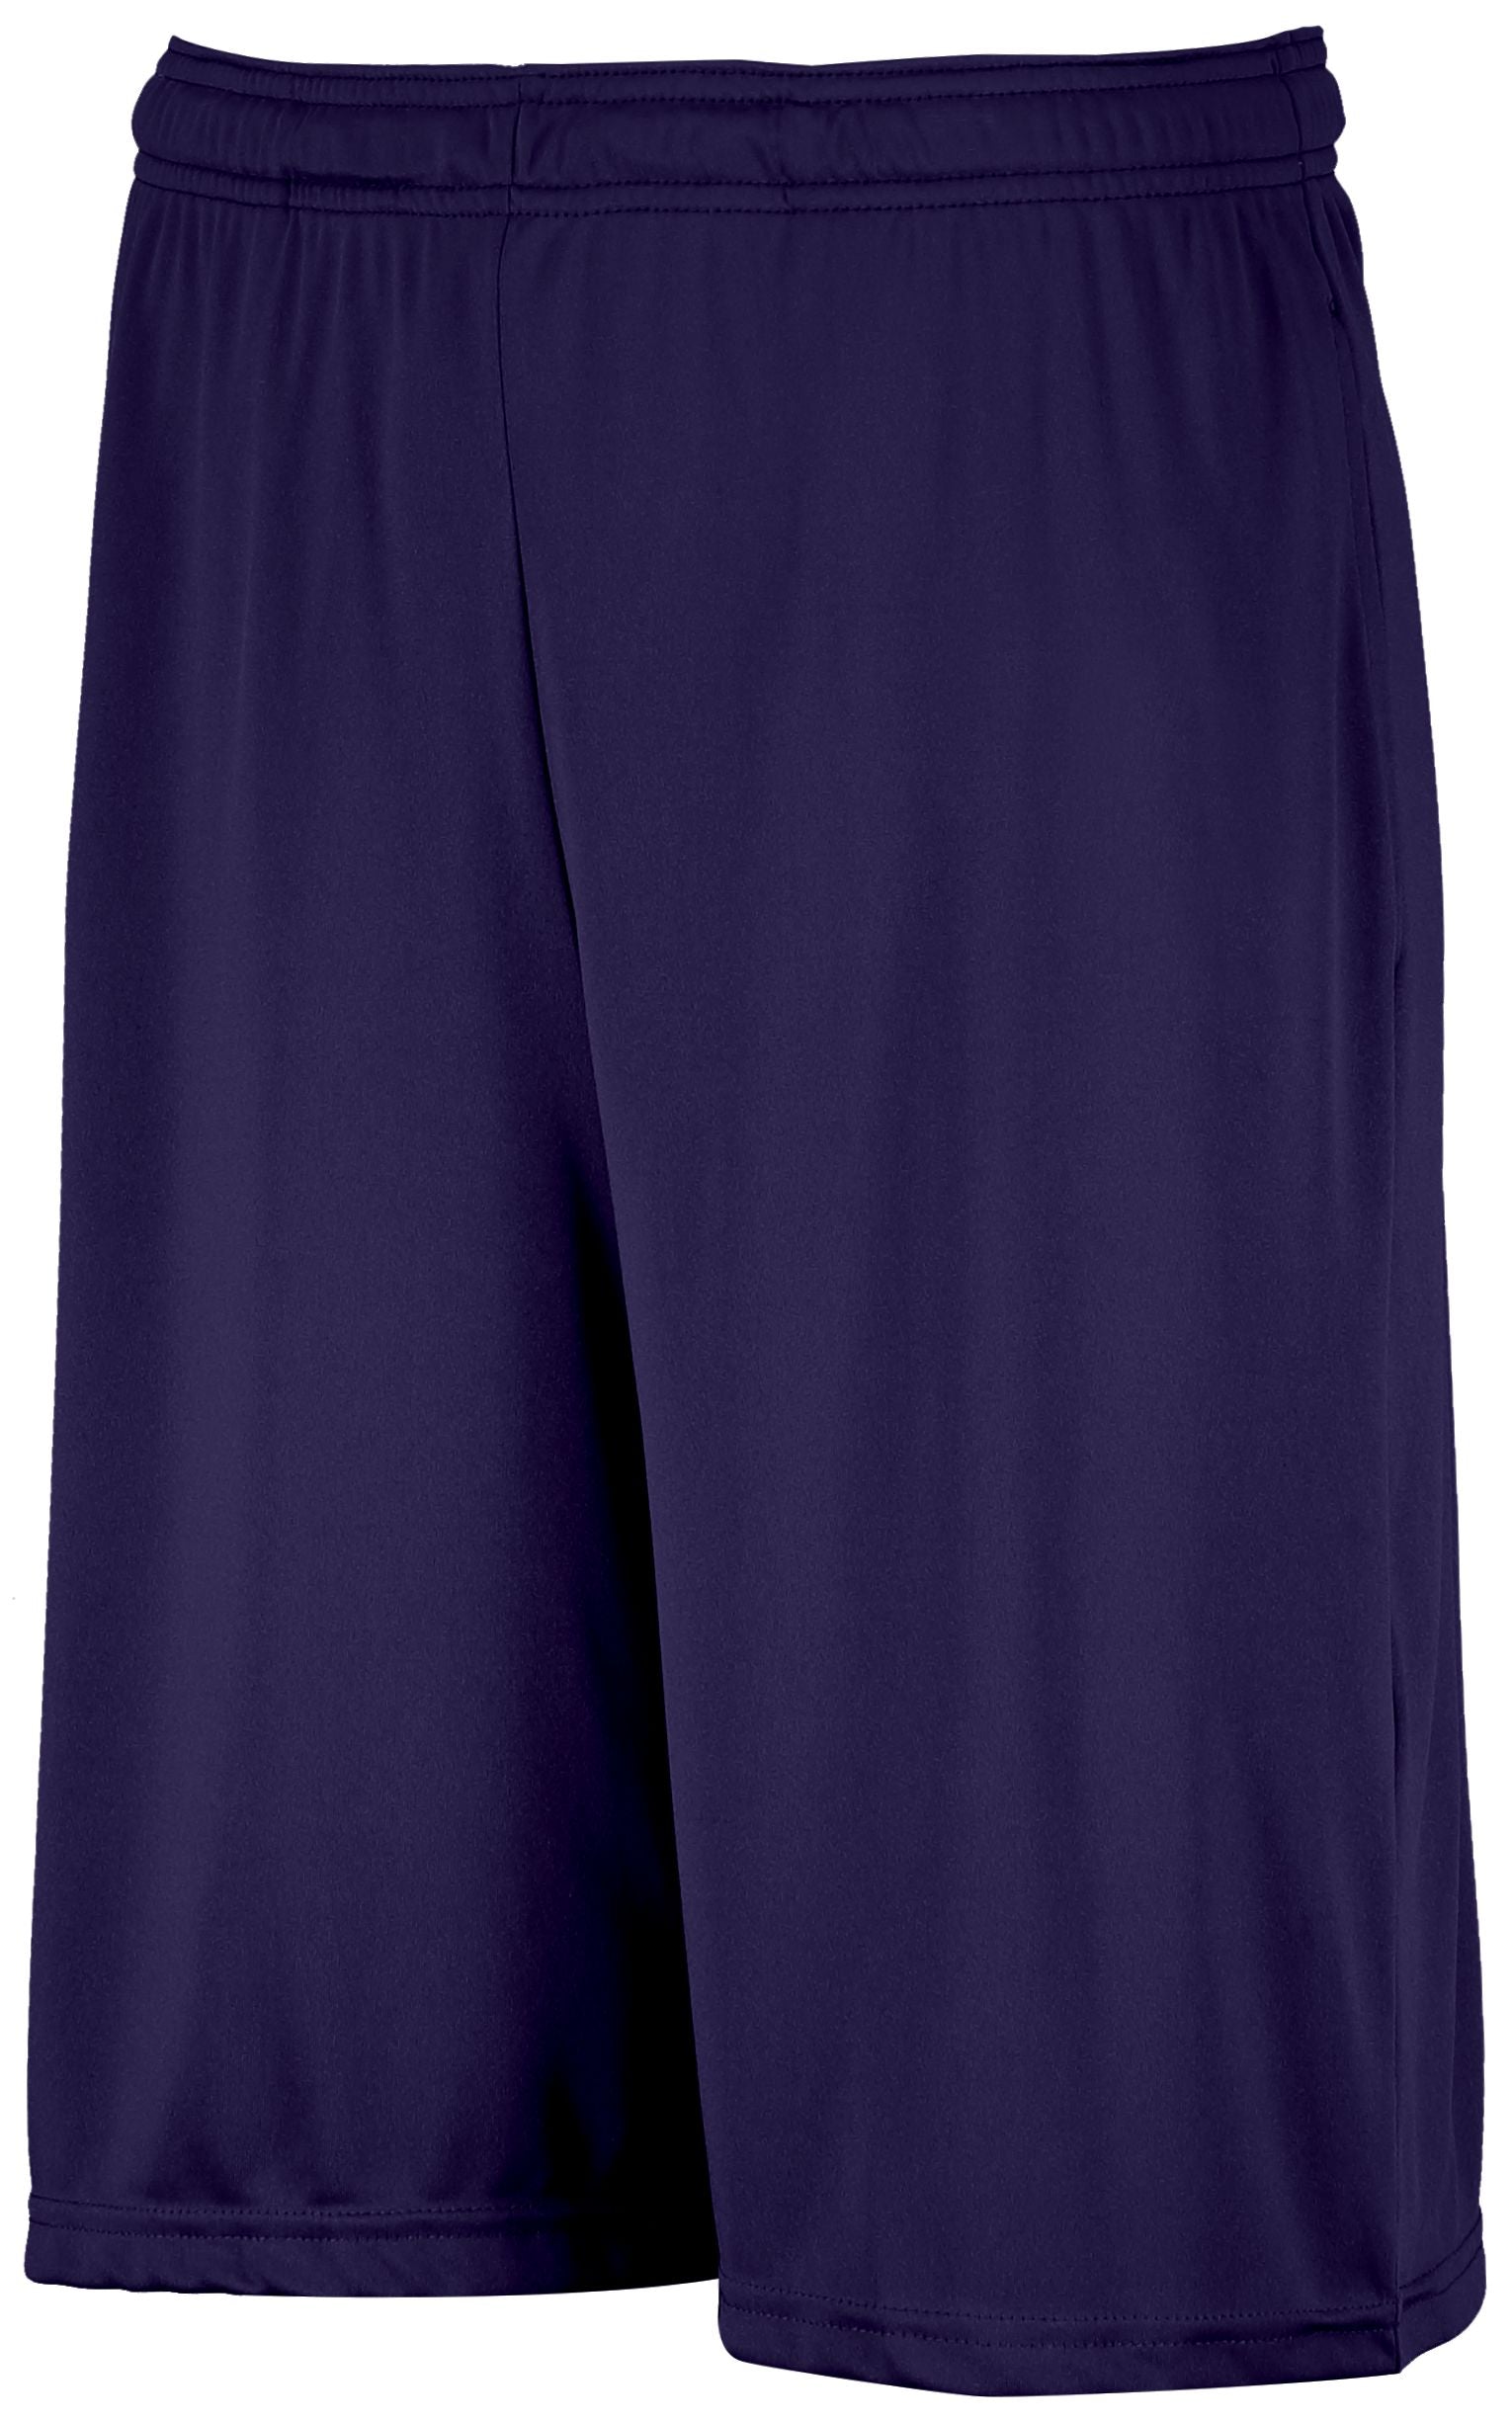 Russell Athletic Dri-Power Essential Performance Shorts With Pockets in Purple  -Part of the Adult, Adult-Shorts, Russell-Athletic-Products product lines at KanaleyCreations.com